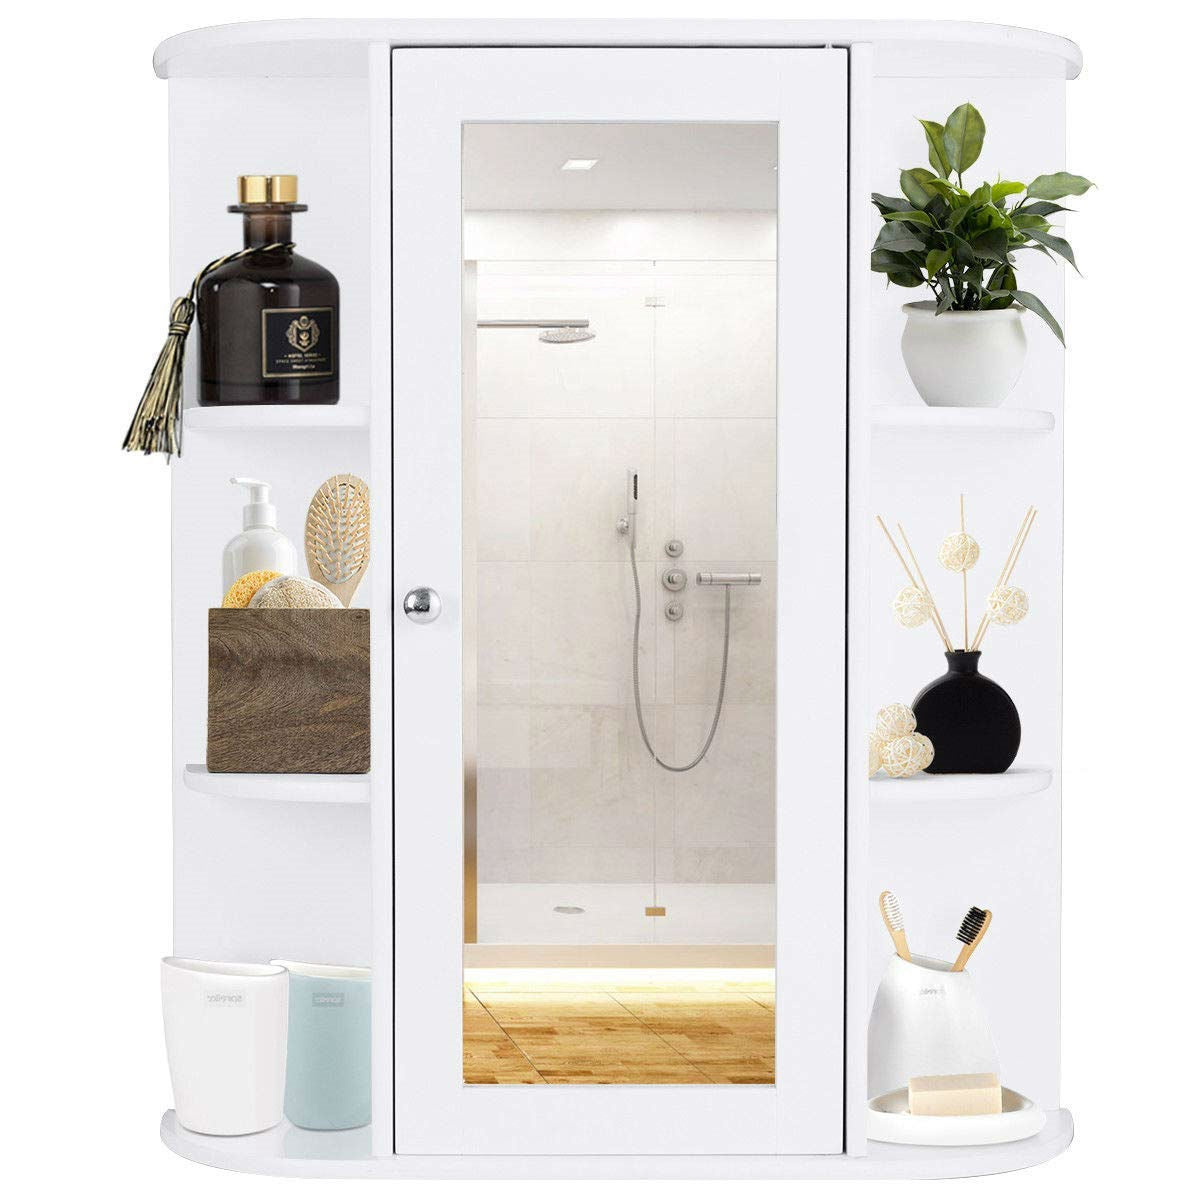 White Bathroom Wall Mounted Medicine Cabinet with Storage Shelves